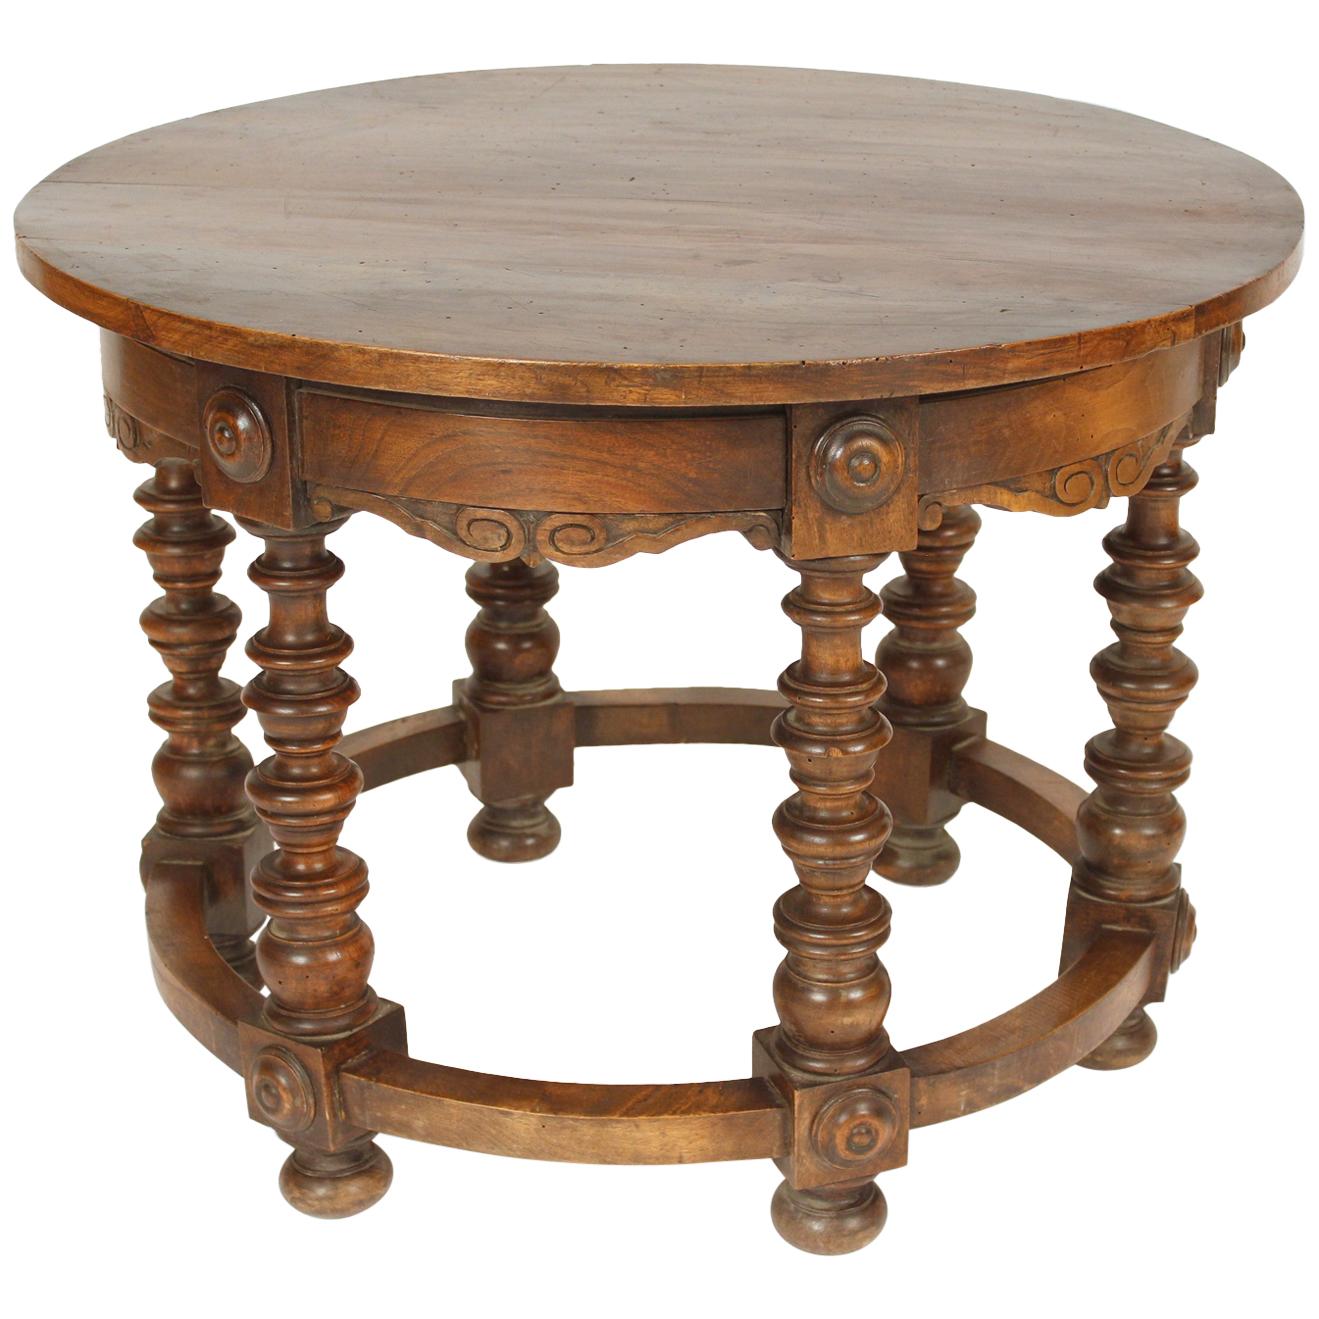 Spanish Revival Walnut Round Occasional Table